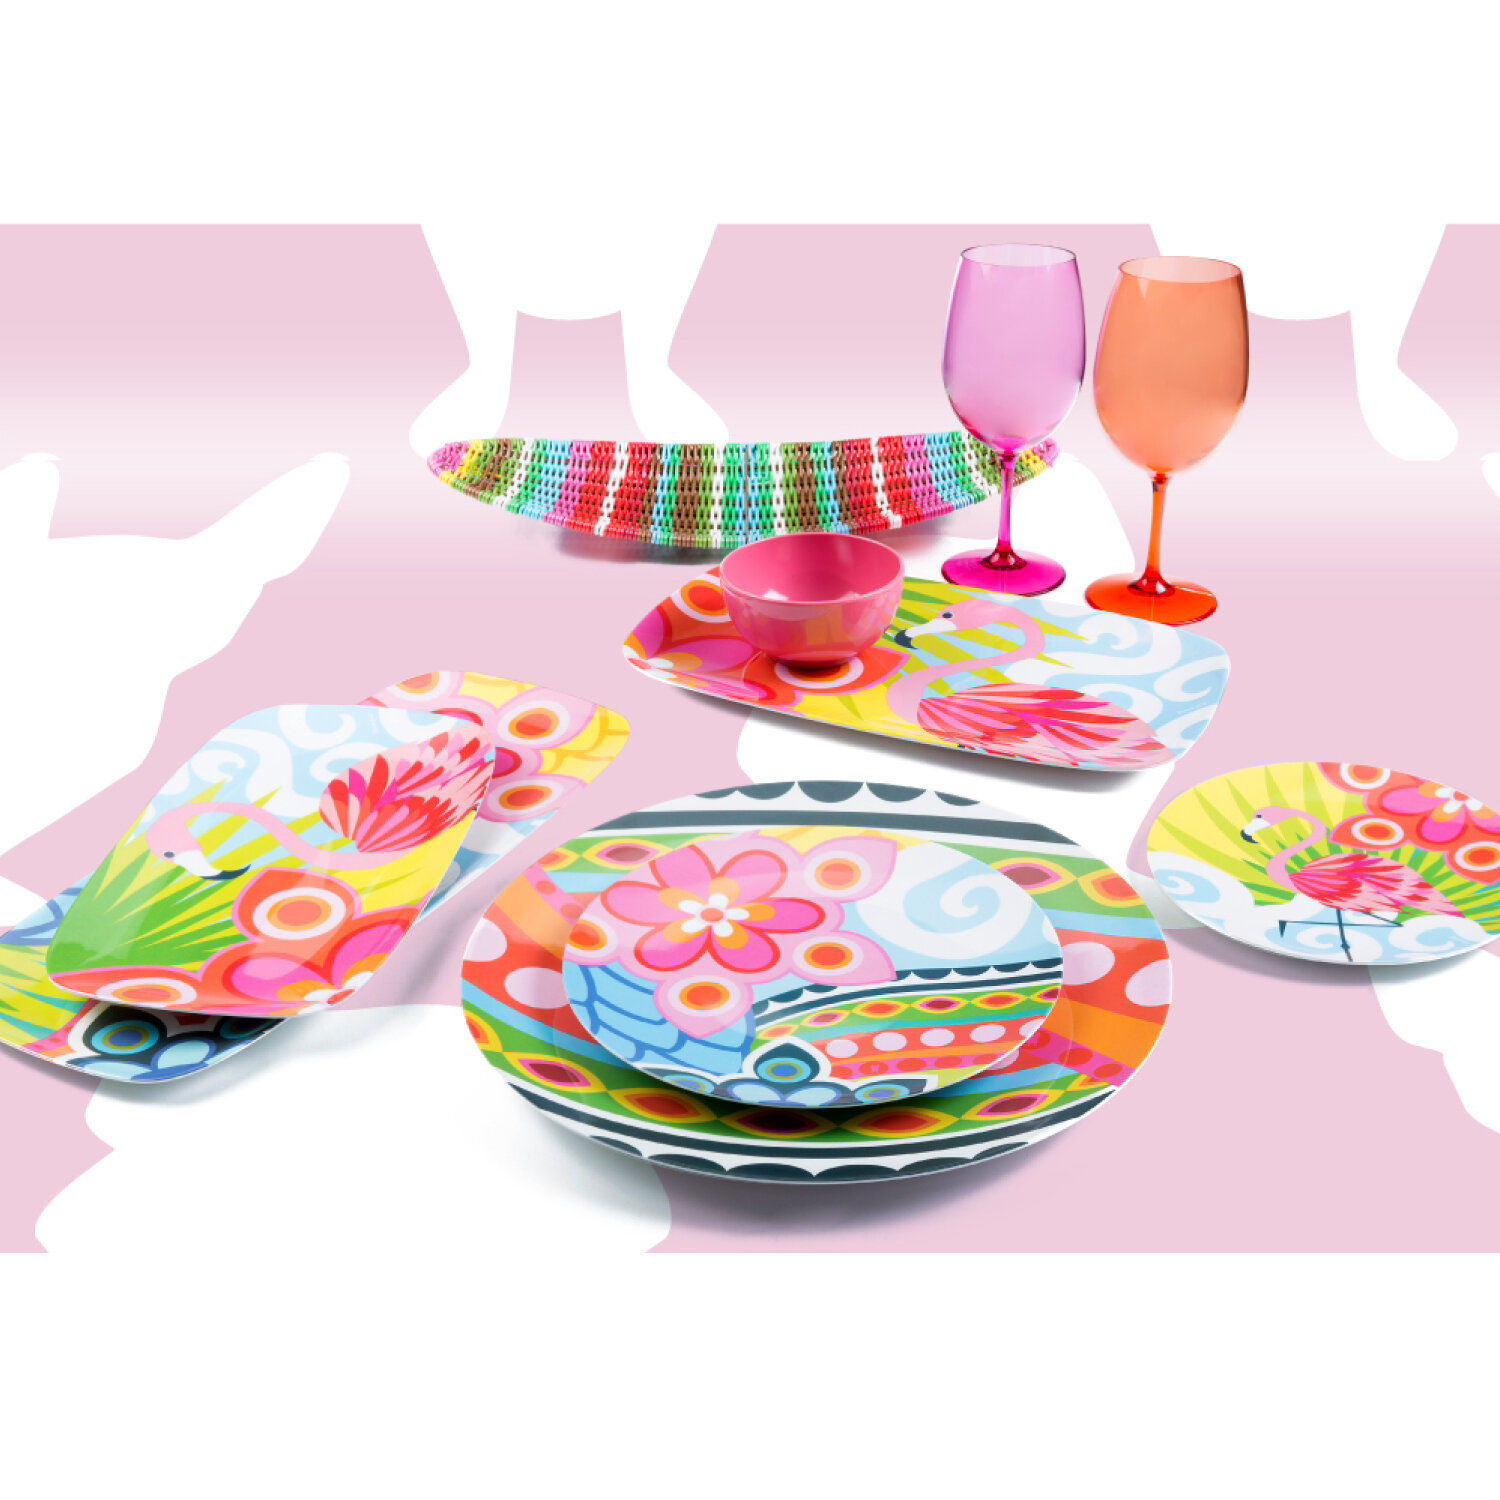  Composite image of French Bull’s tableware and pattern background using Photoshop and Illustrator 